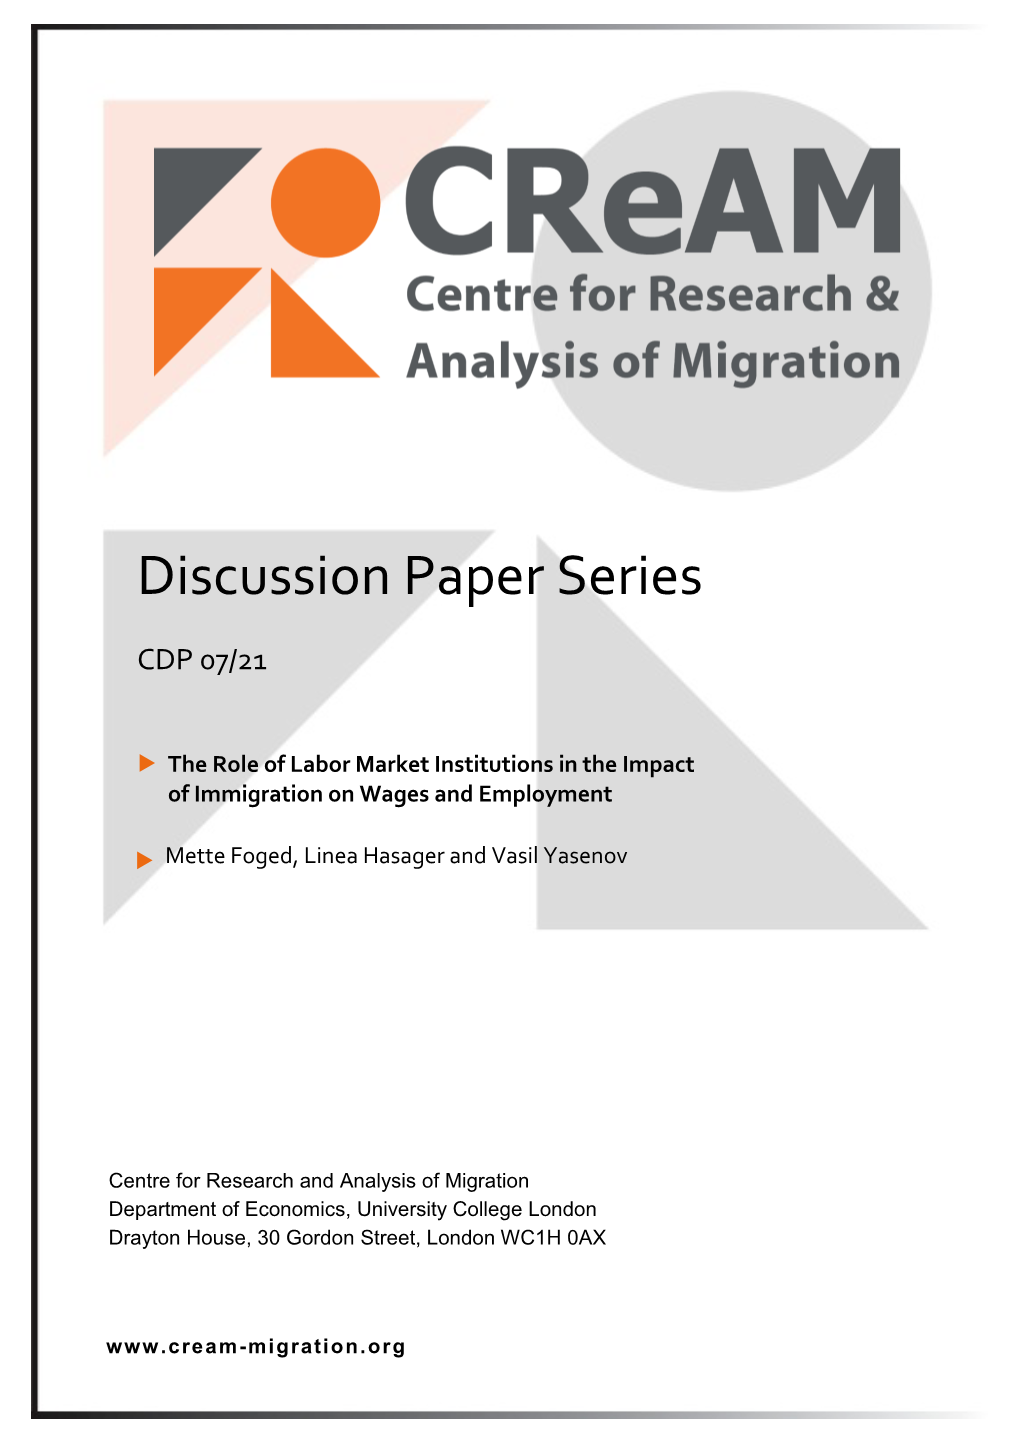 The Role of Labor Market Institutions in the Impact of Immigration on Wages and Employment